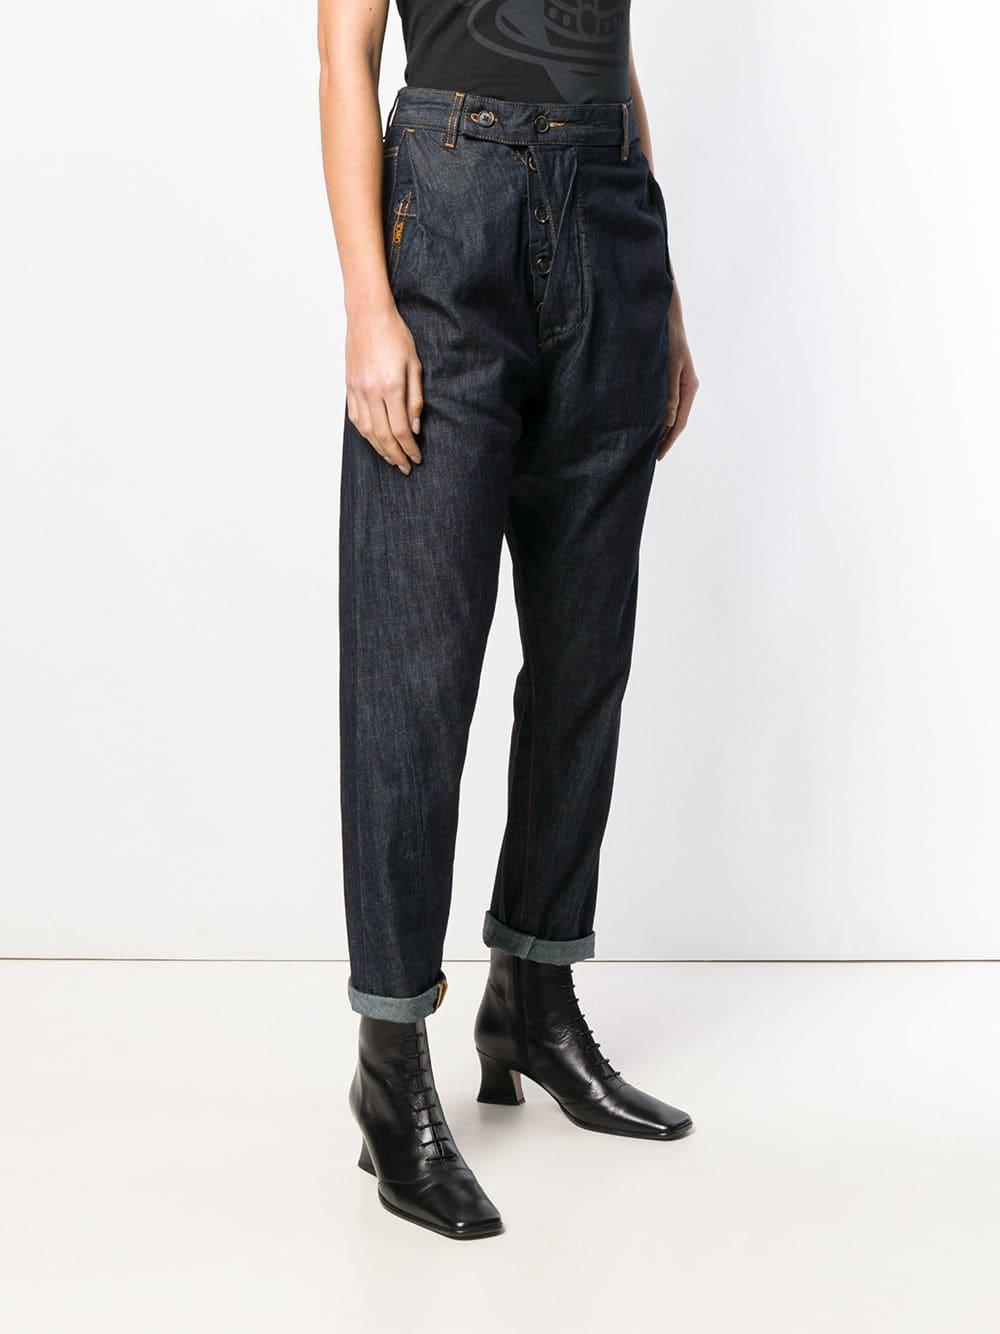 Vivienne Westwood Anglomania Denim Alcoholic Jeans in Blue | Lyst